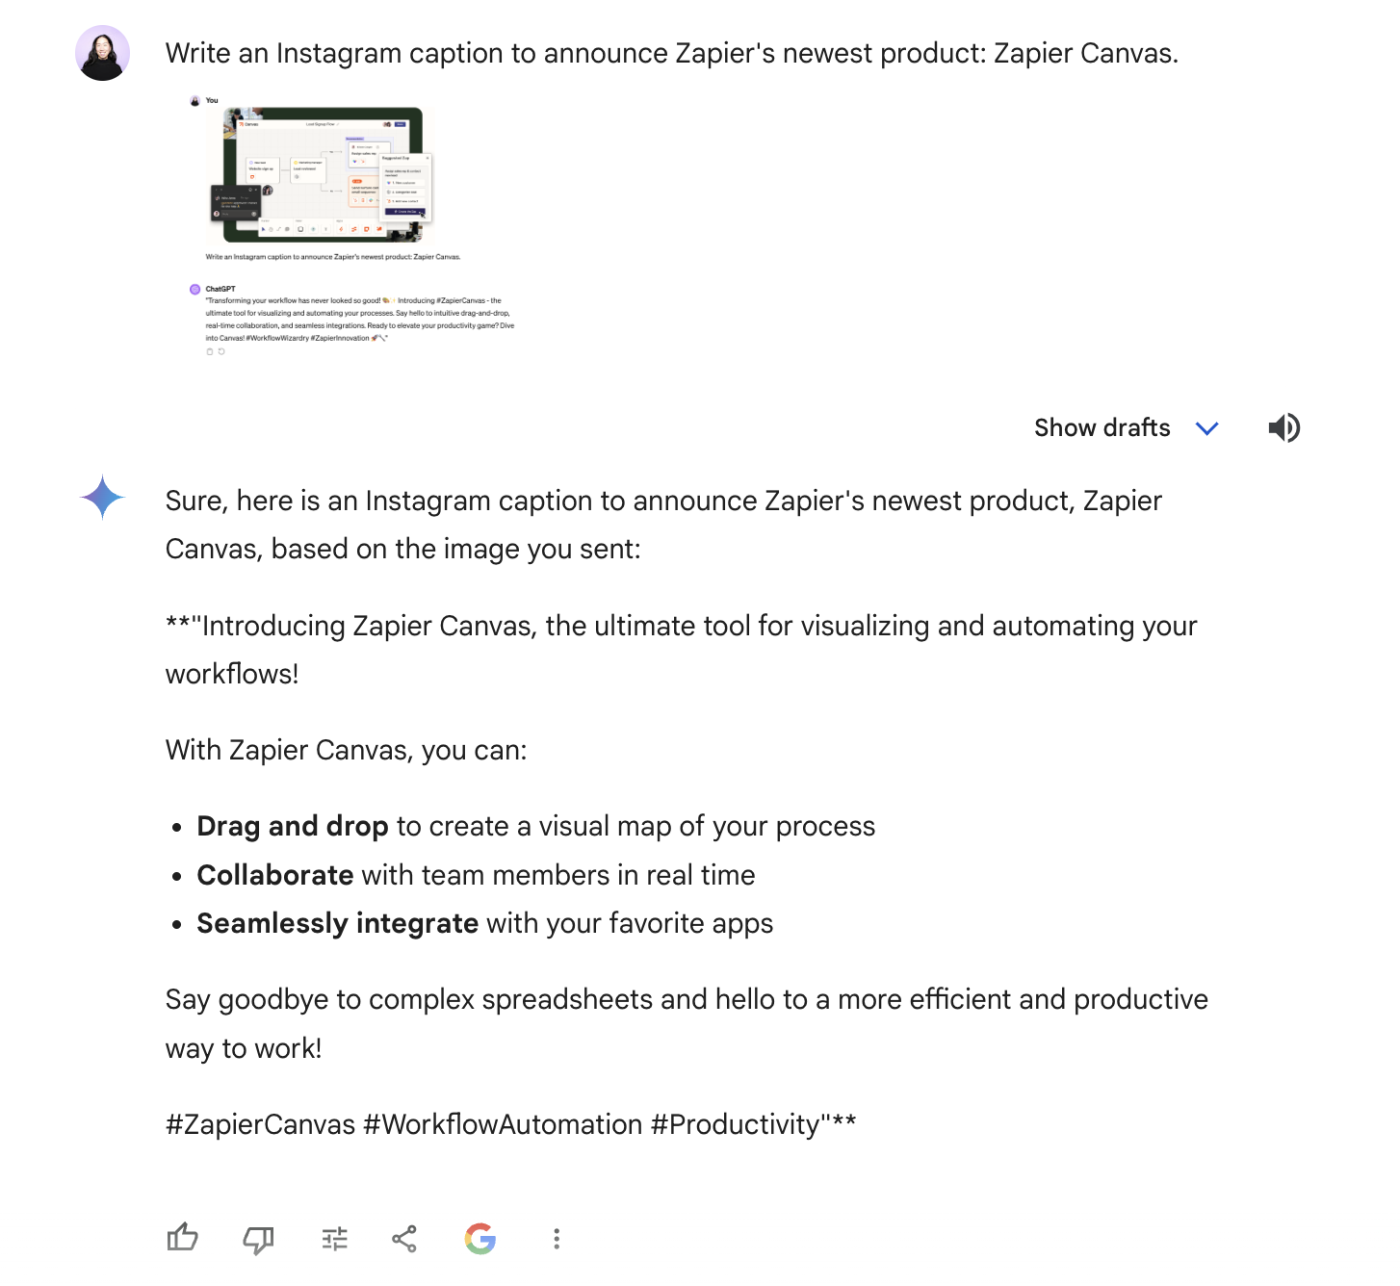 Lengthy Instagram caption drafted by Gemini announcing Zapier Canvas. 